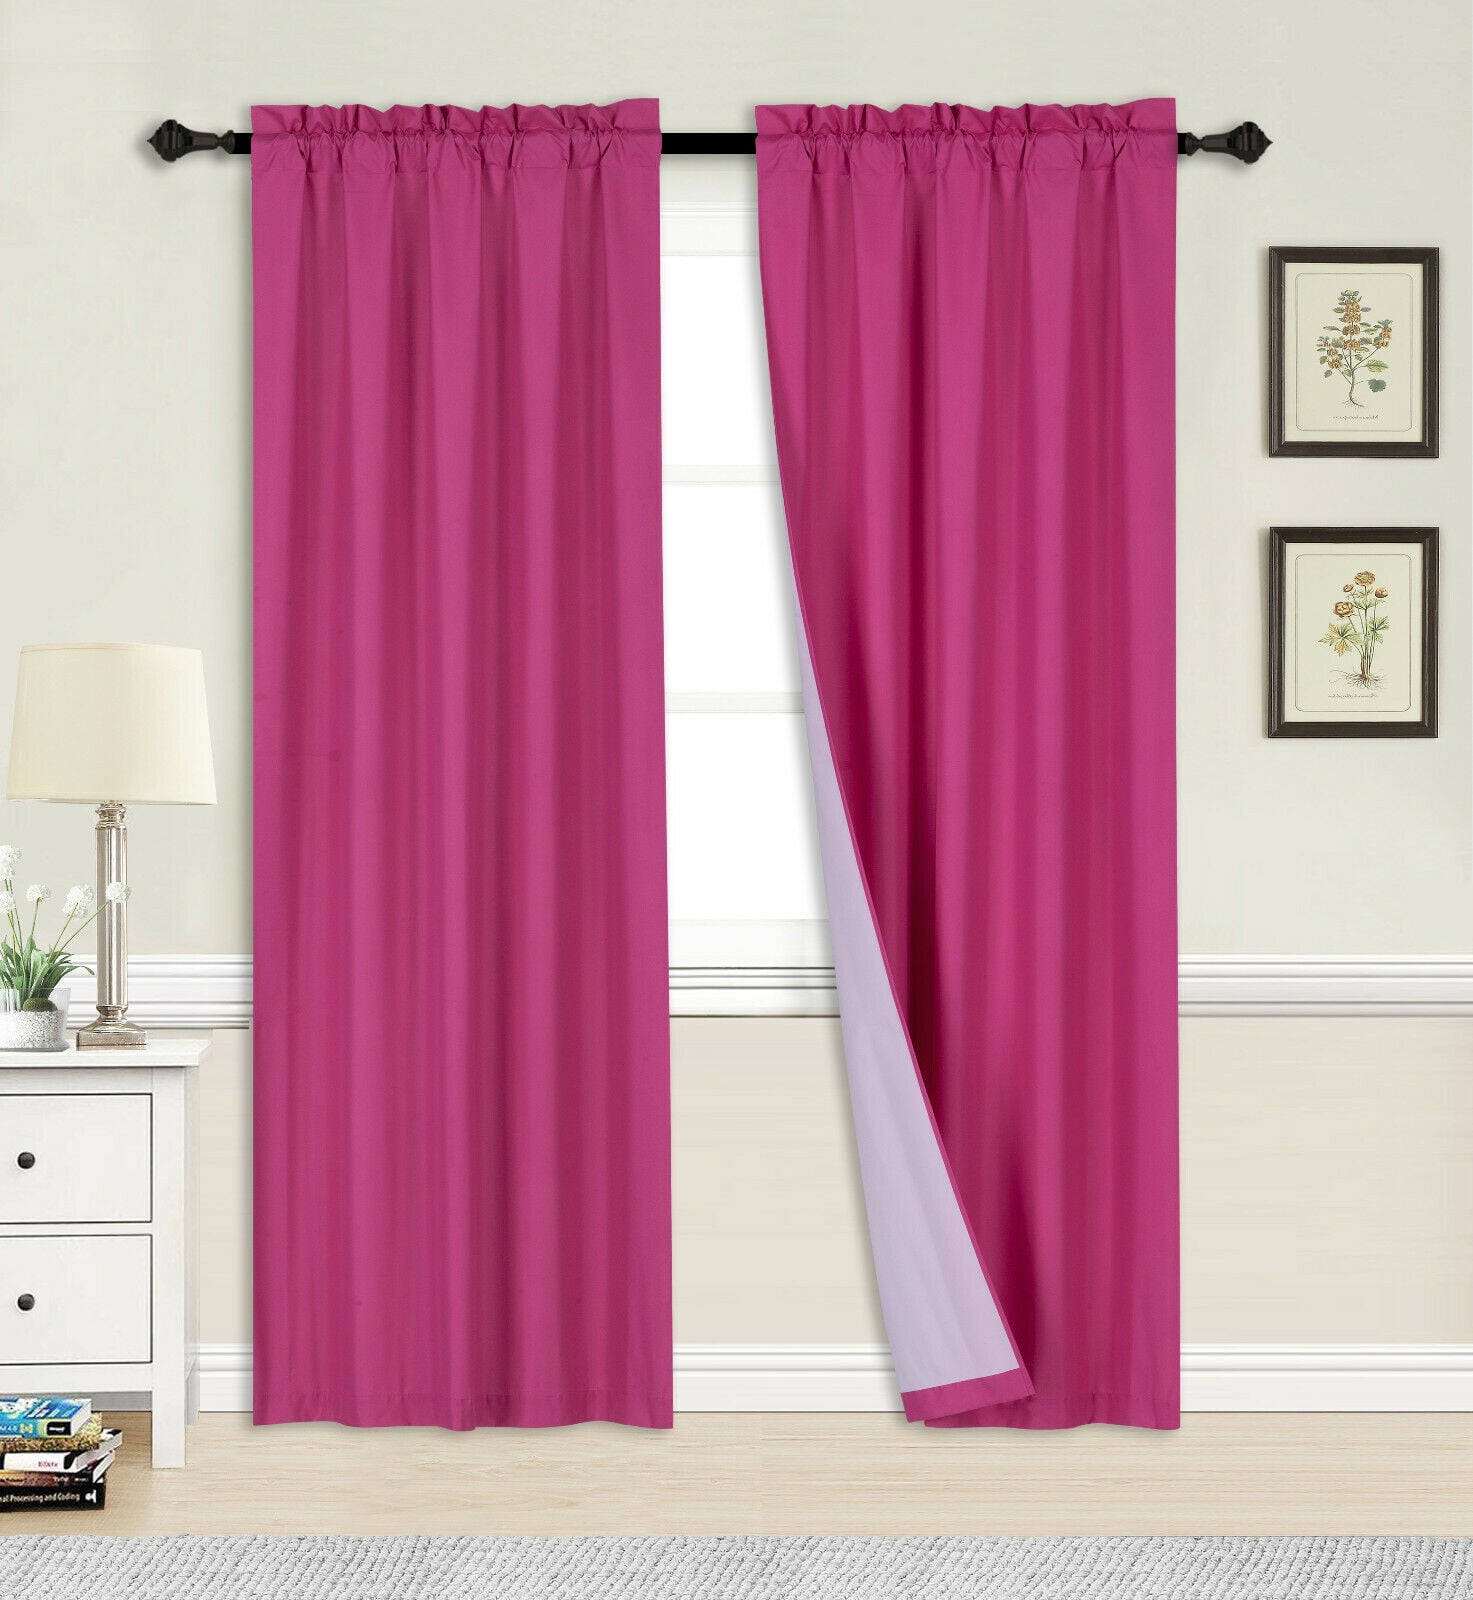 2pc Hot Pink Blackout Panel Linen White, Hot Pink Panel Curtains